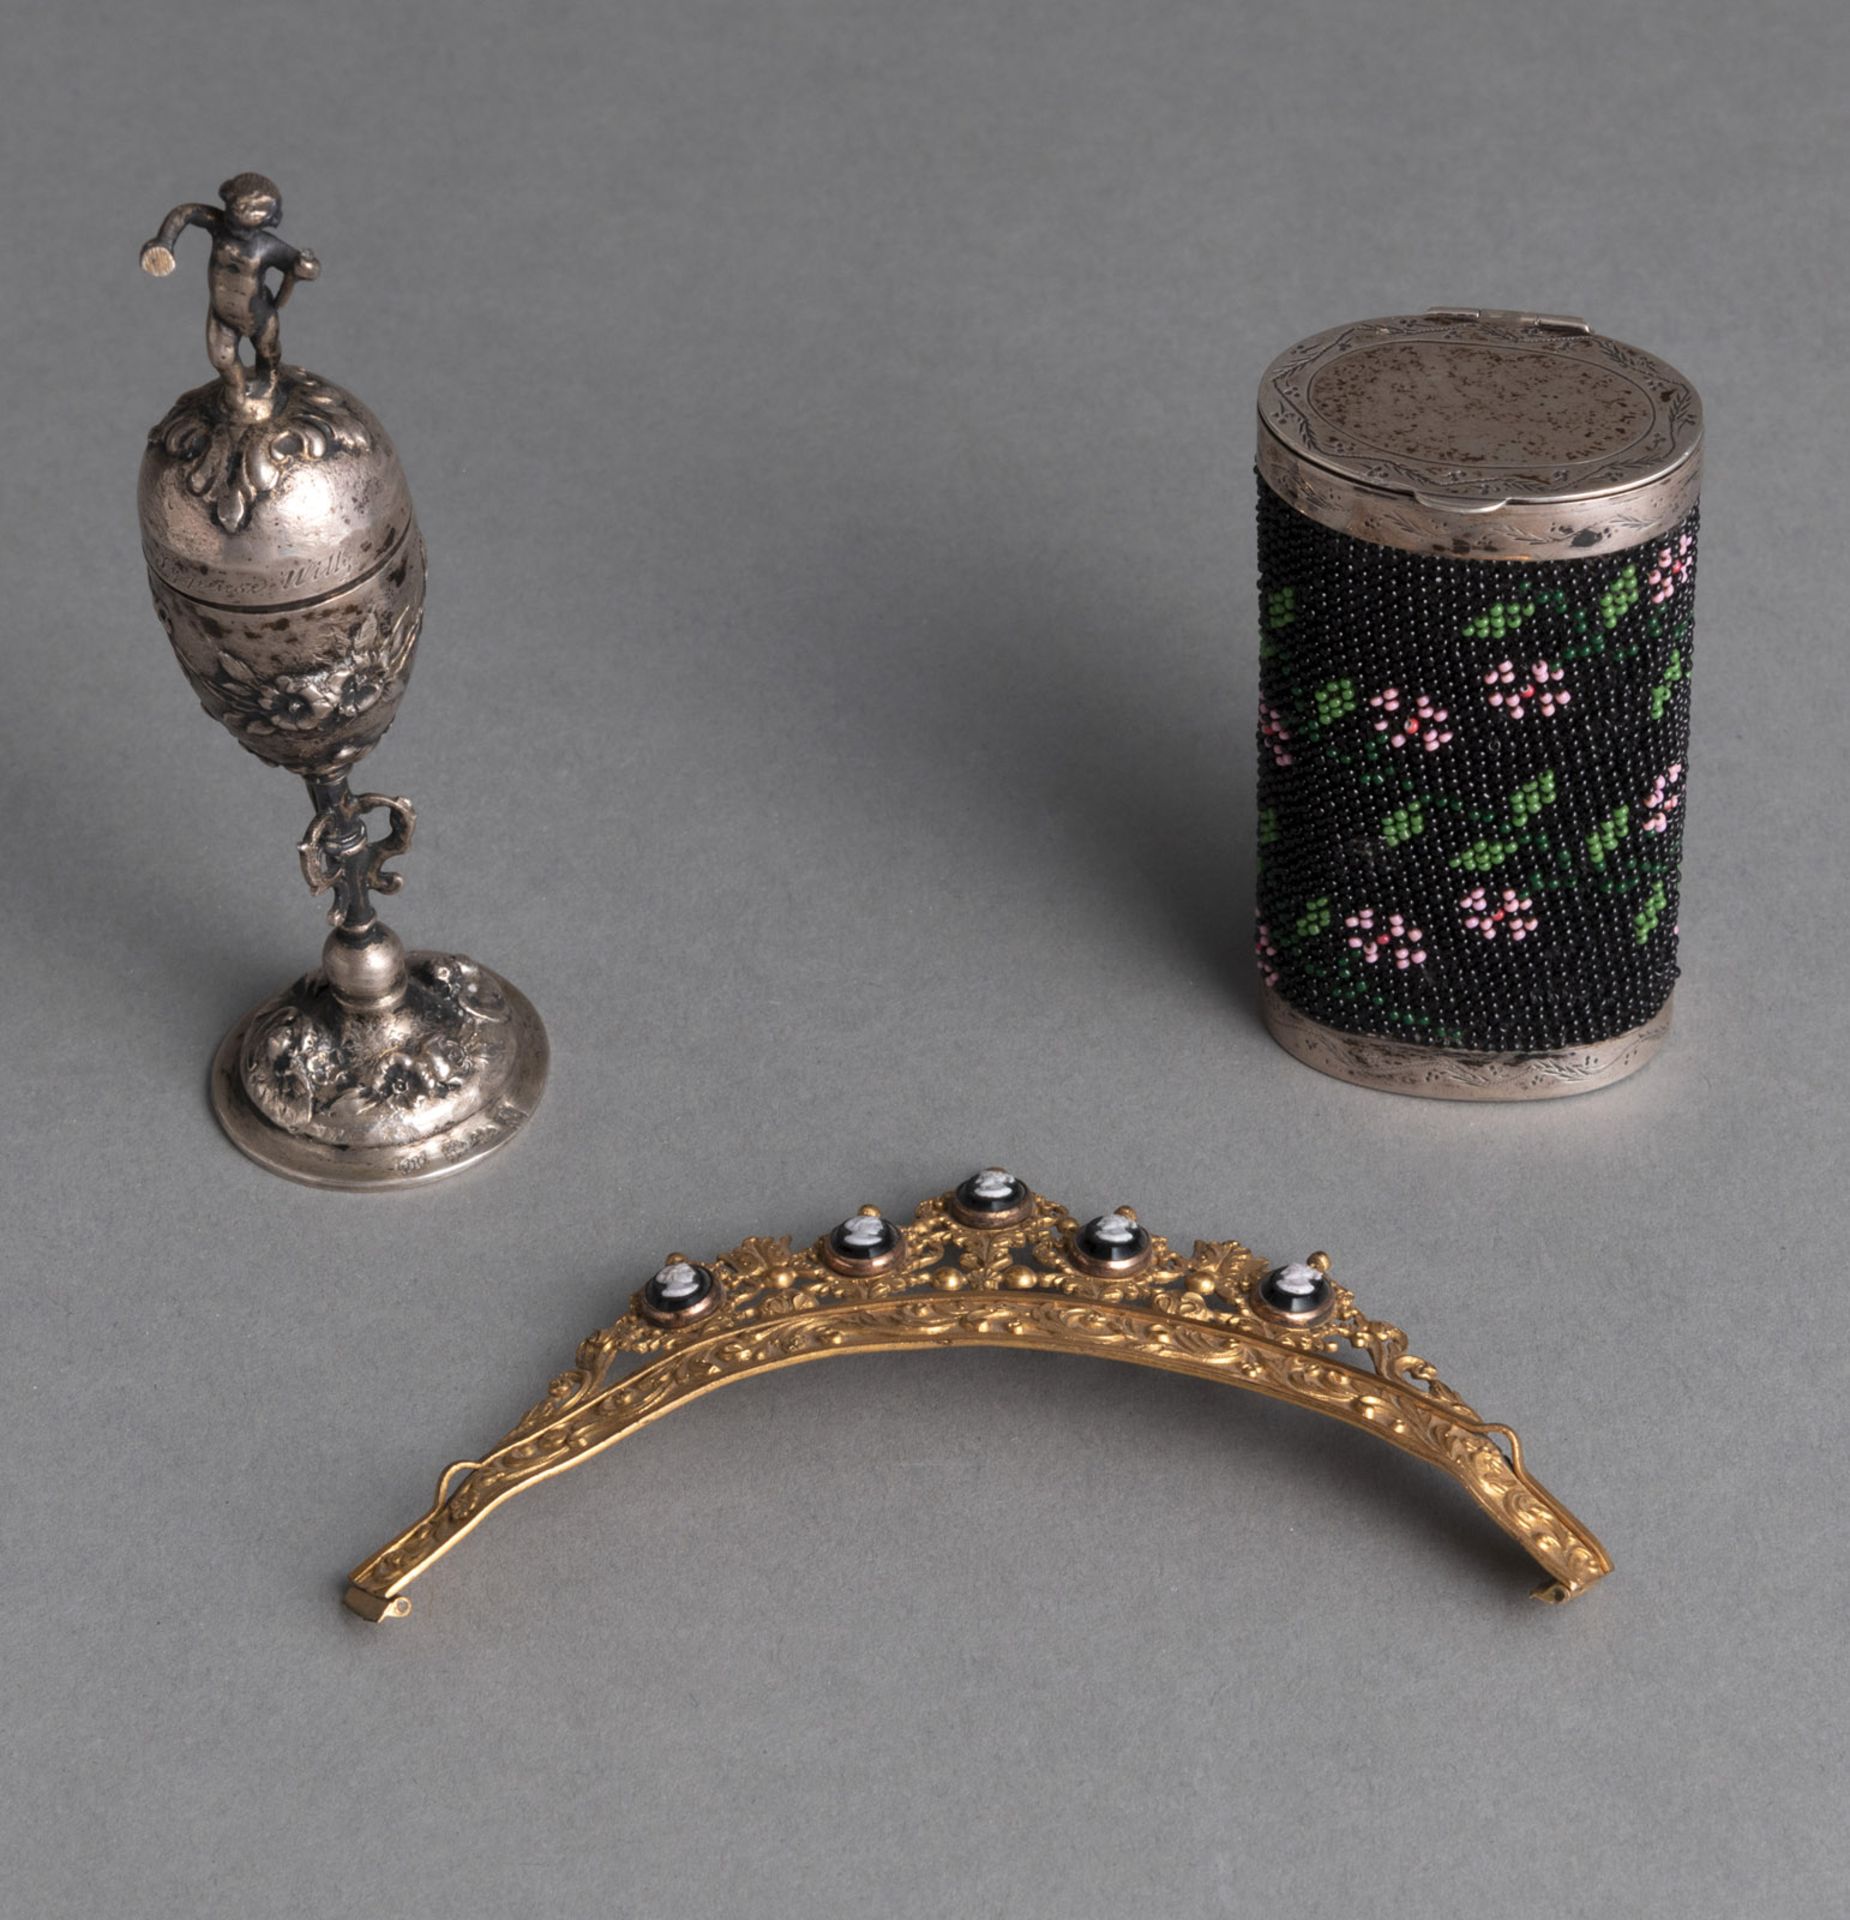 A TIARA, A MINIATURE CUP AND A SMALL CASE - Image 2 of 5